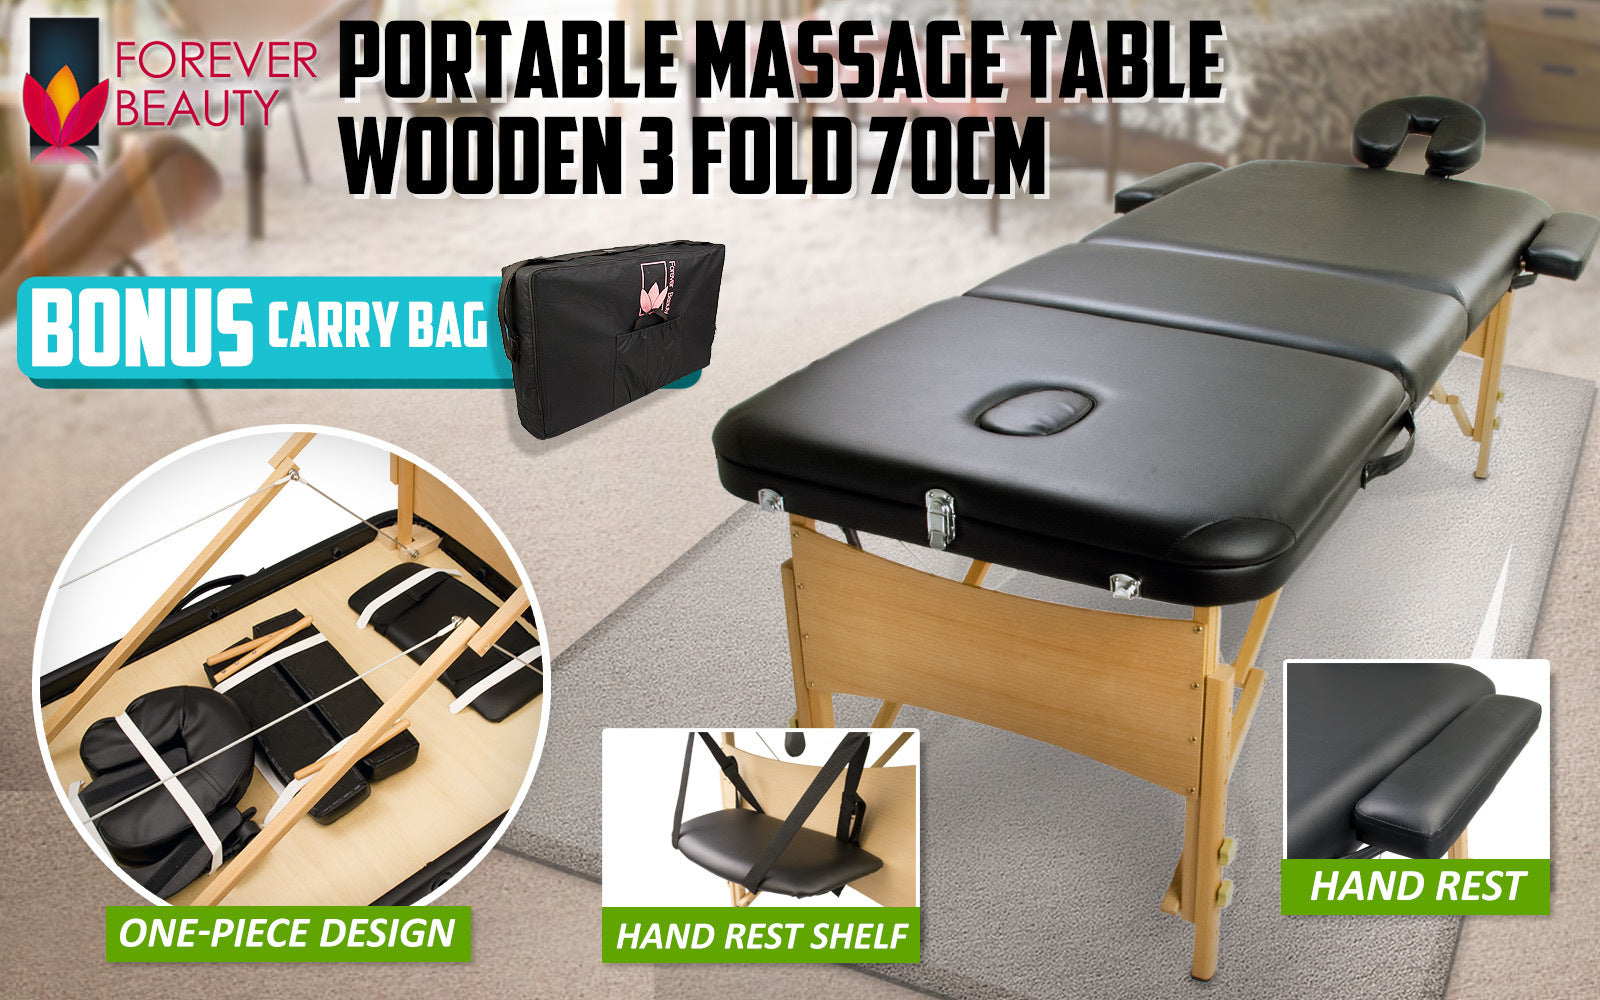 Black Portable Massage Table Bed Therapy Waxing 3 Fold 70cm Wooden - image2